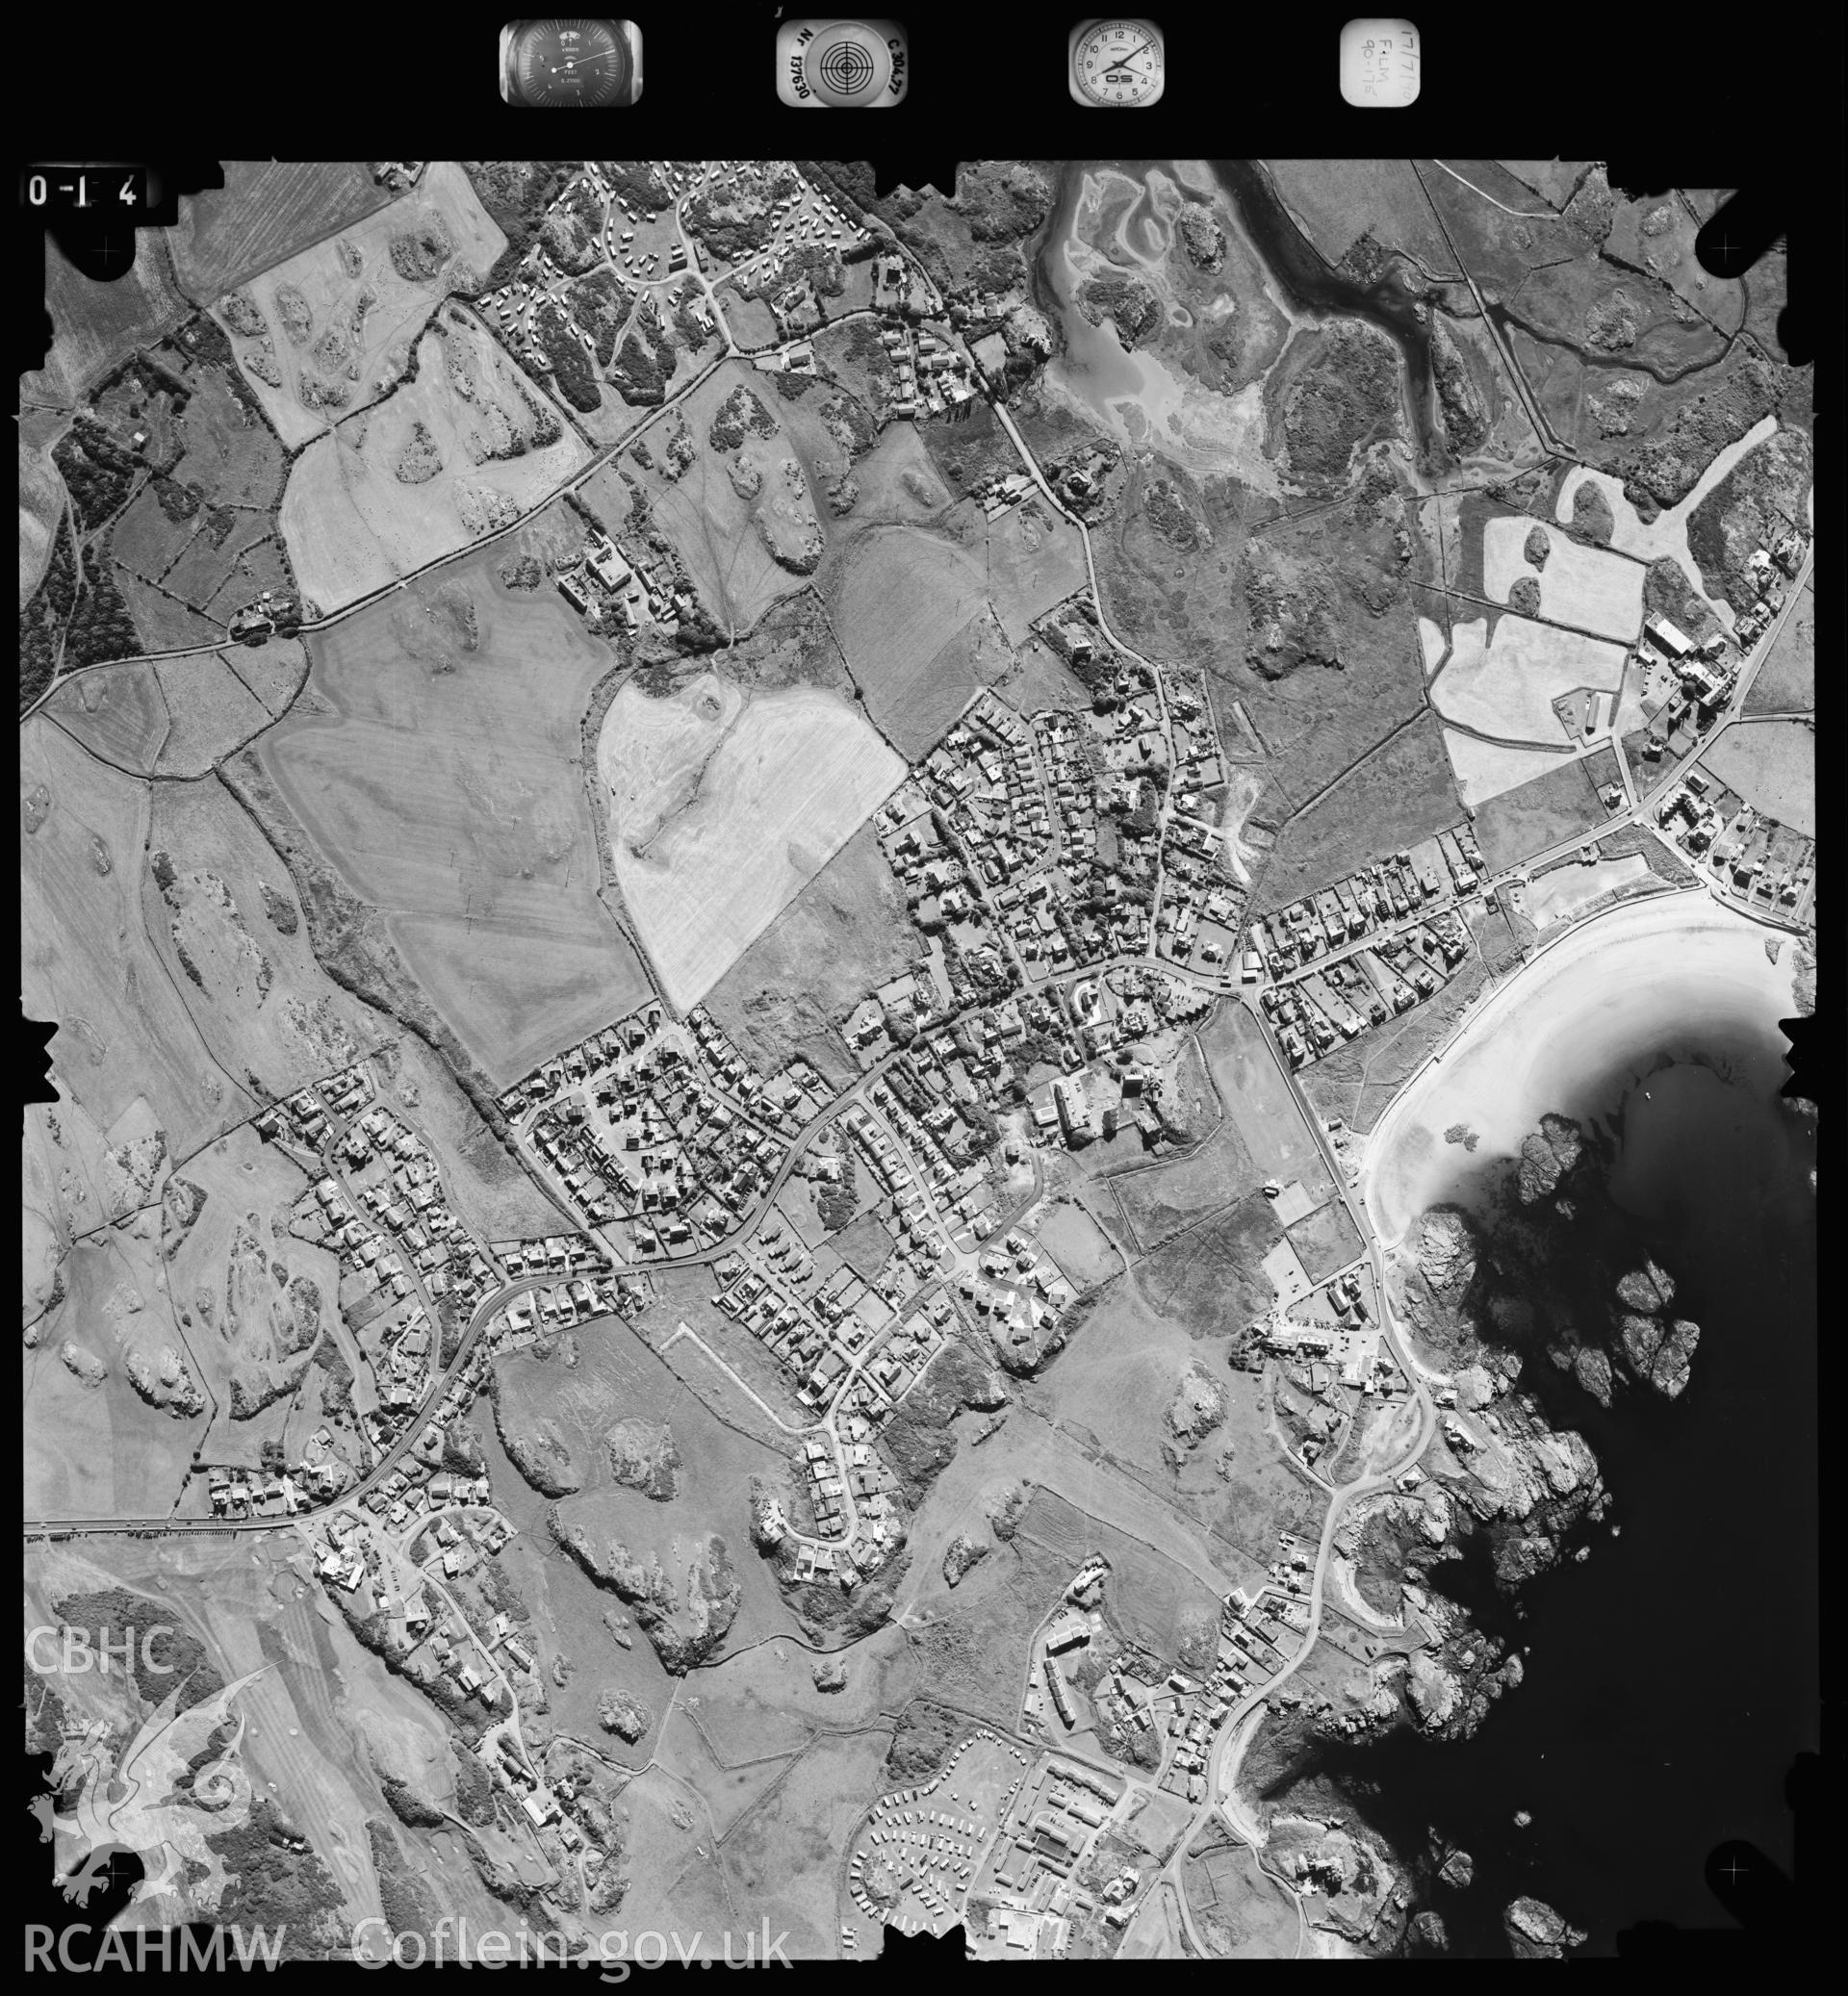 Digitized copy of an aerial photograph showing the area around Trearddur Bay, taken by Ordnance Survey, 1990.